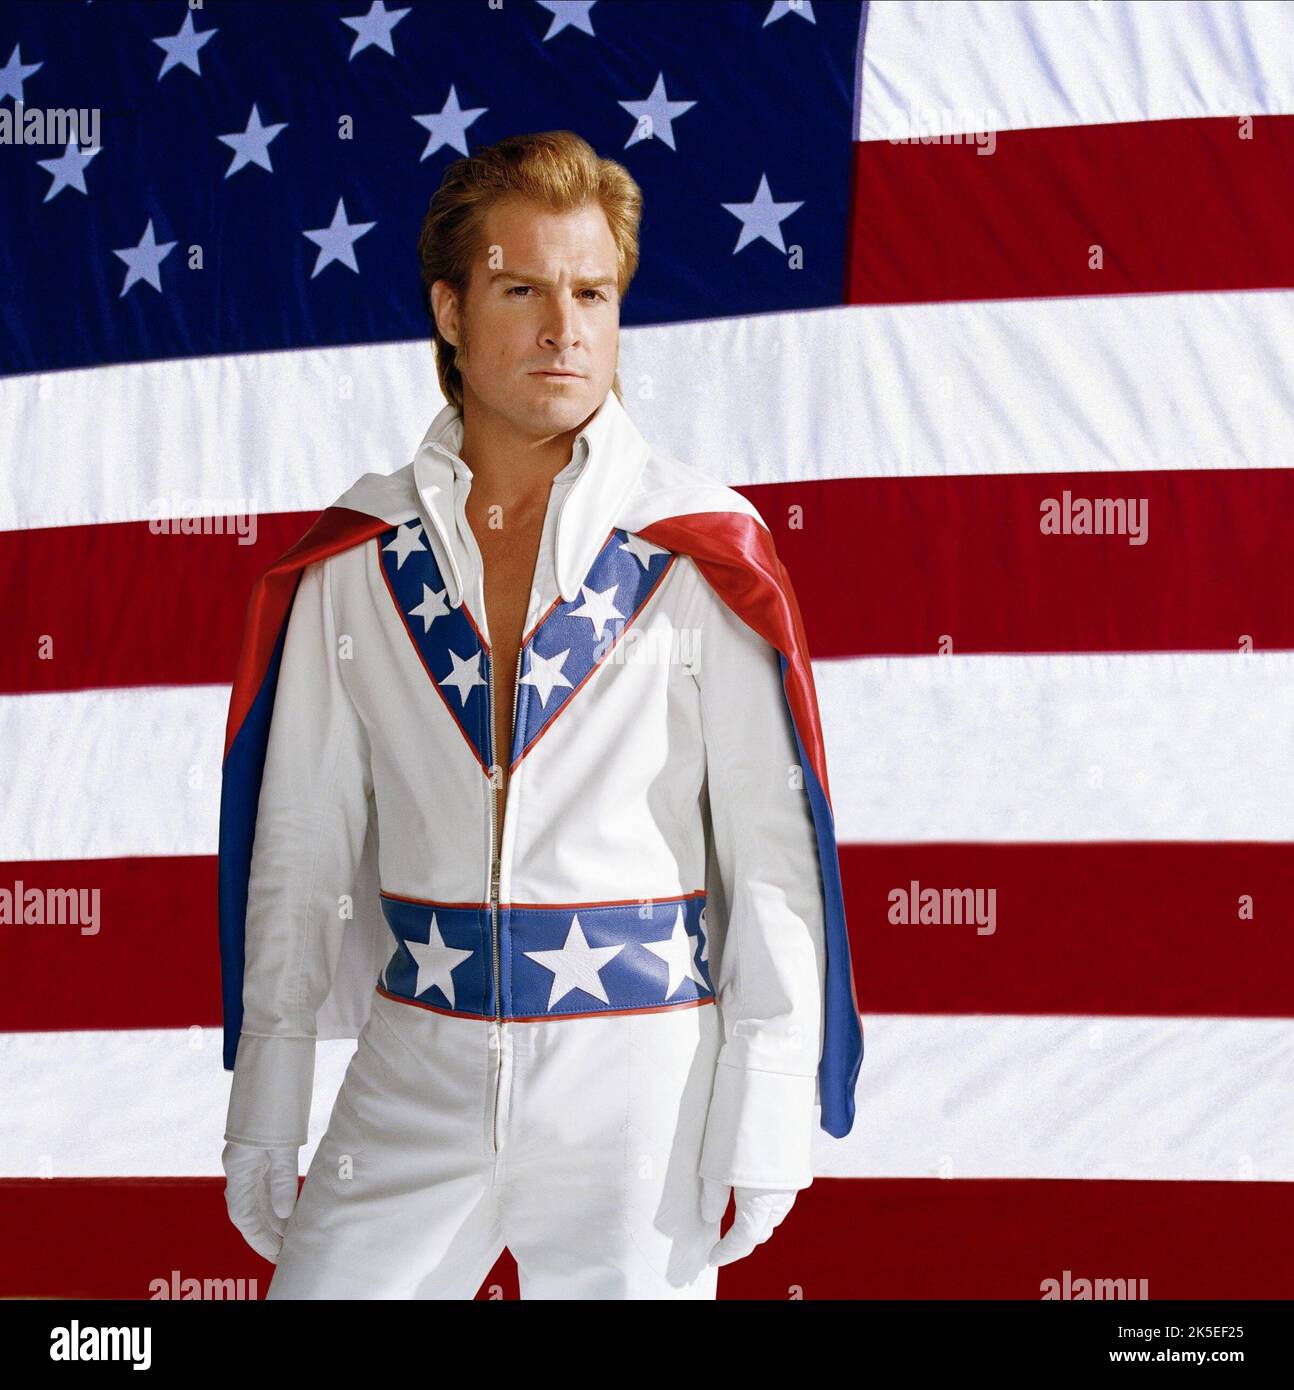 GEORGE EADS, EVEL KNIEVEL, 2004 Banque D'Images